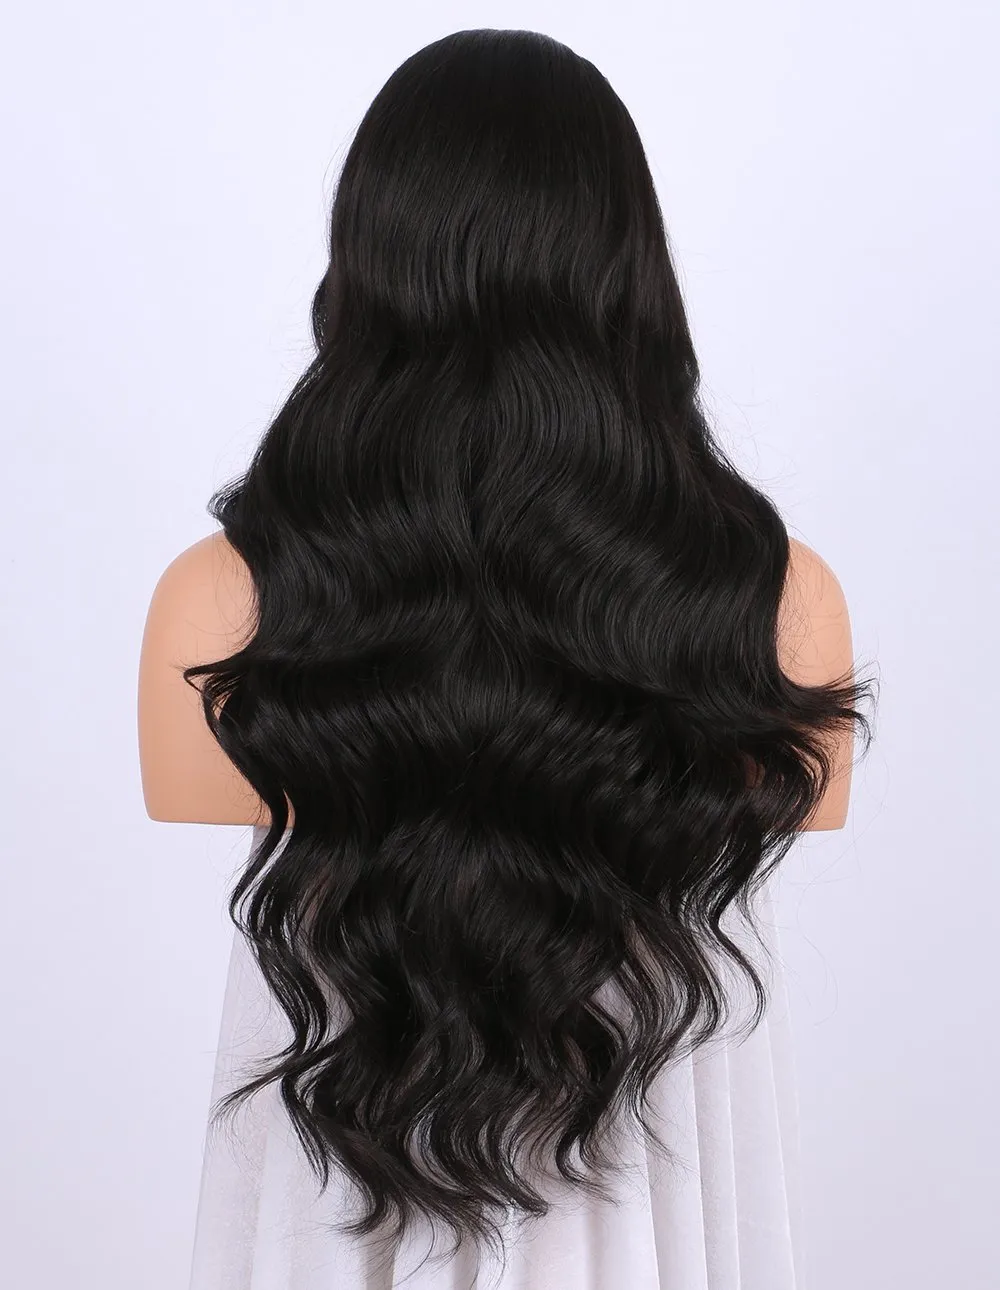 Synthetic Wigs for women Natural Looking Long Wavy Right Side Parting Heat Resistant Replacement Wig 24 inches7126120